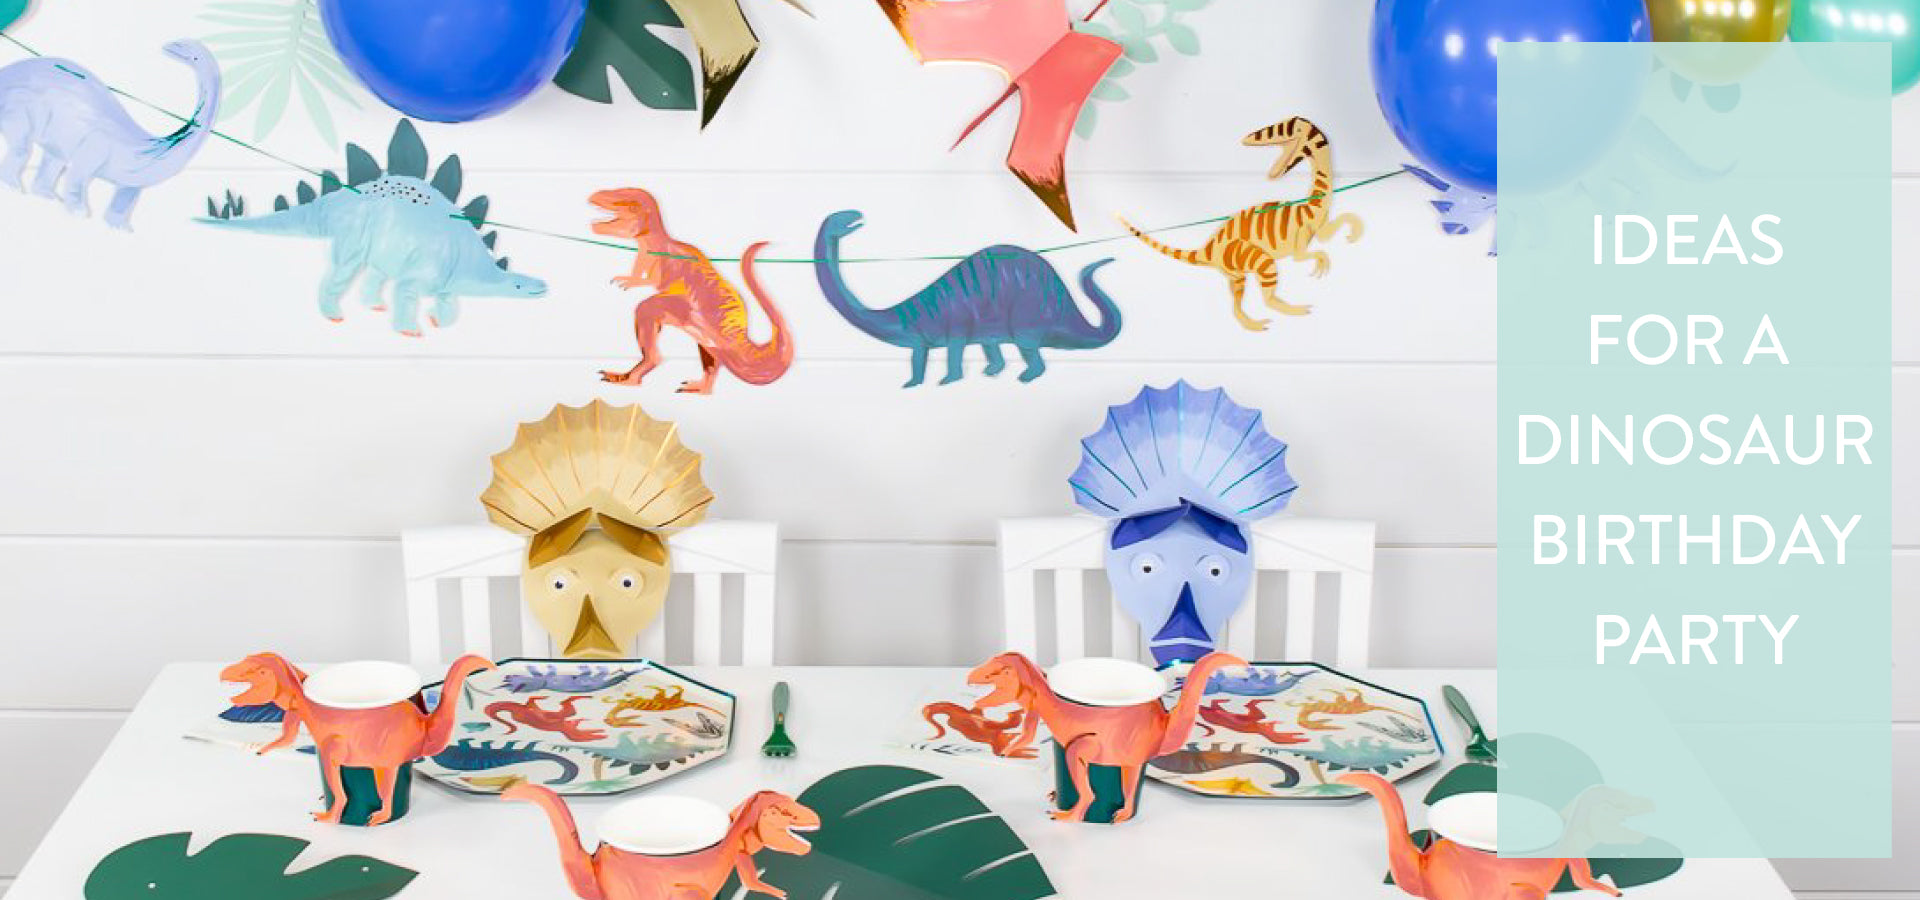 Ideas for a Dinosaur Birthday Party | The Party Darling